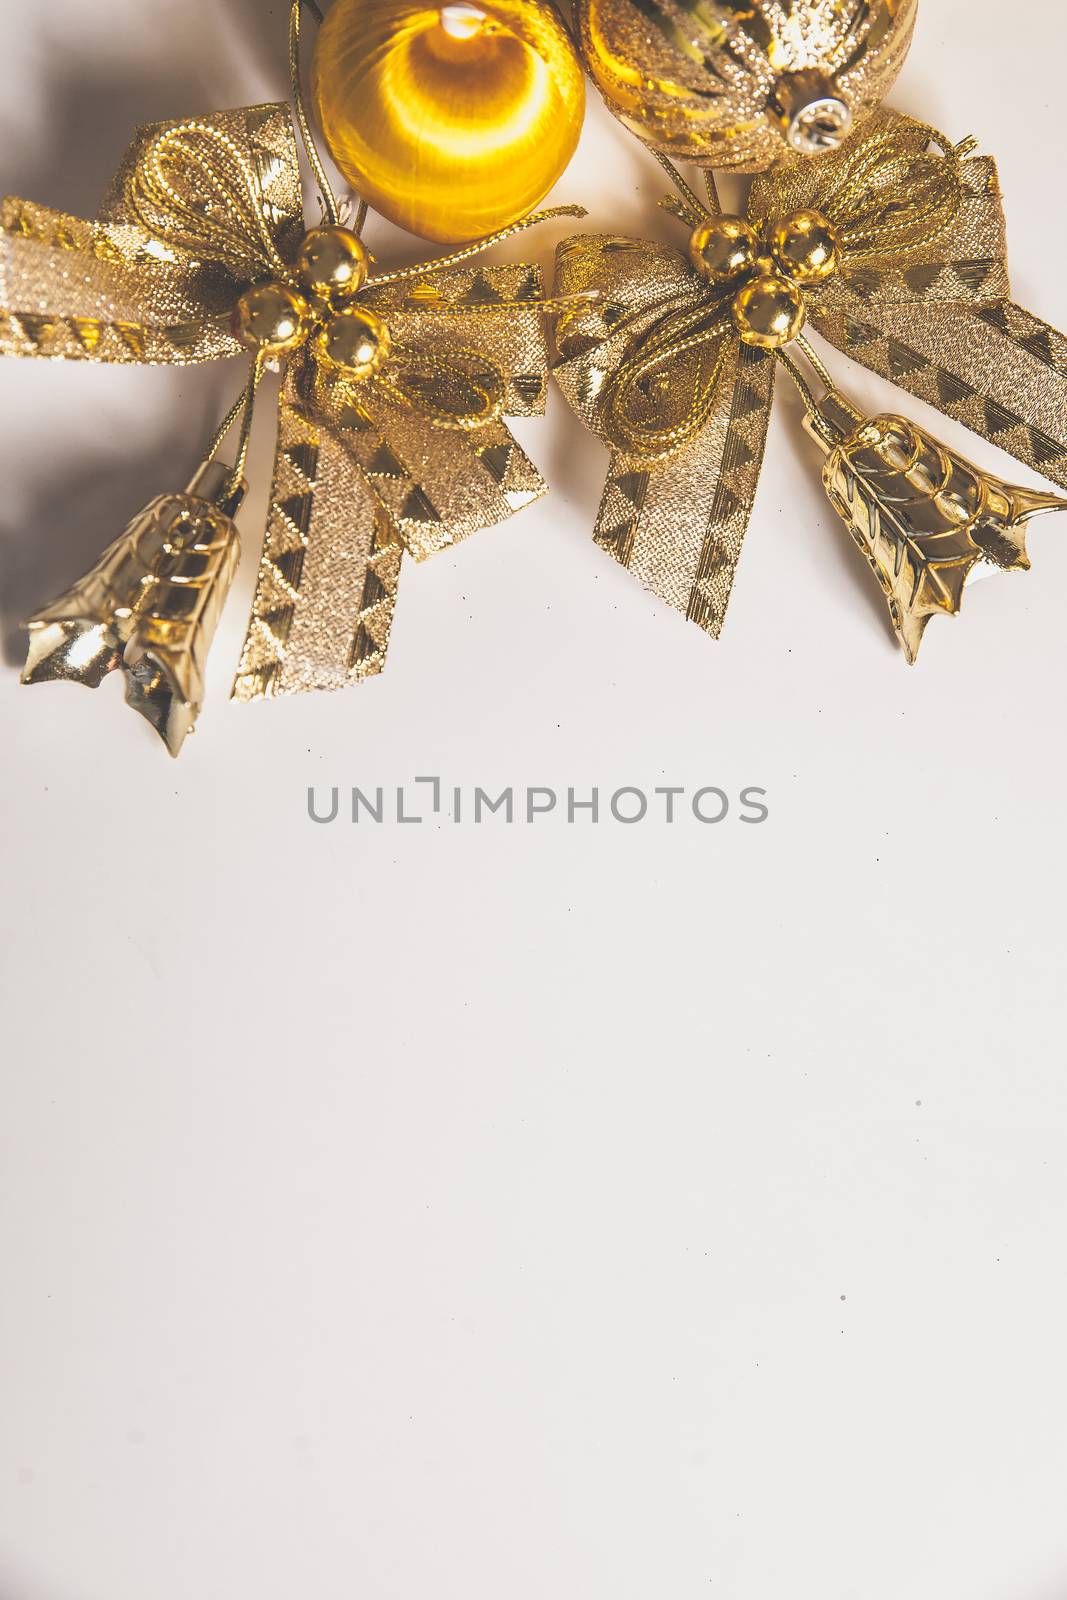 Photo background for happy new year  with golden color decor by mi_viri